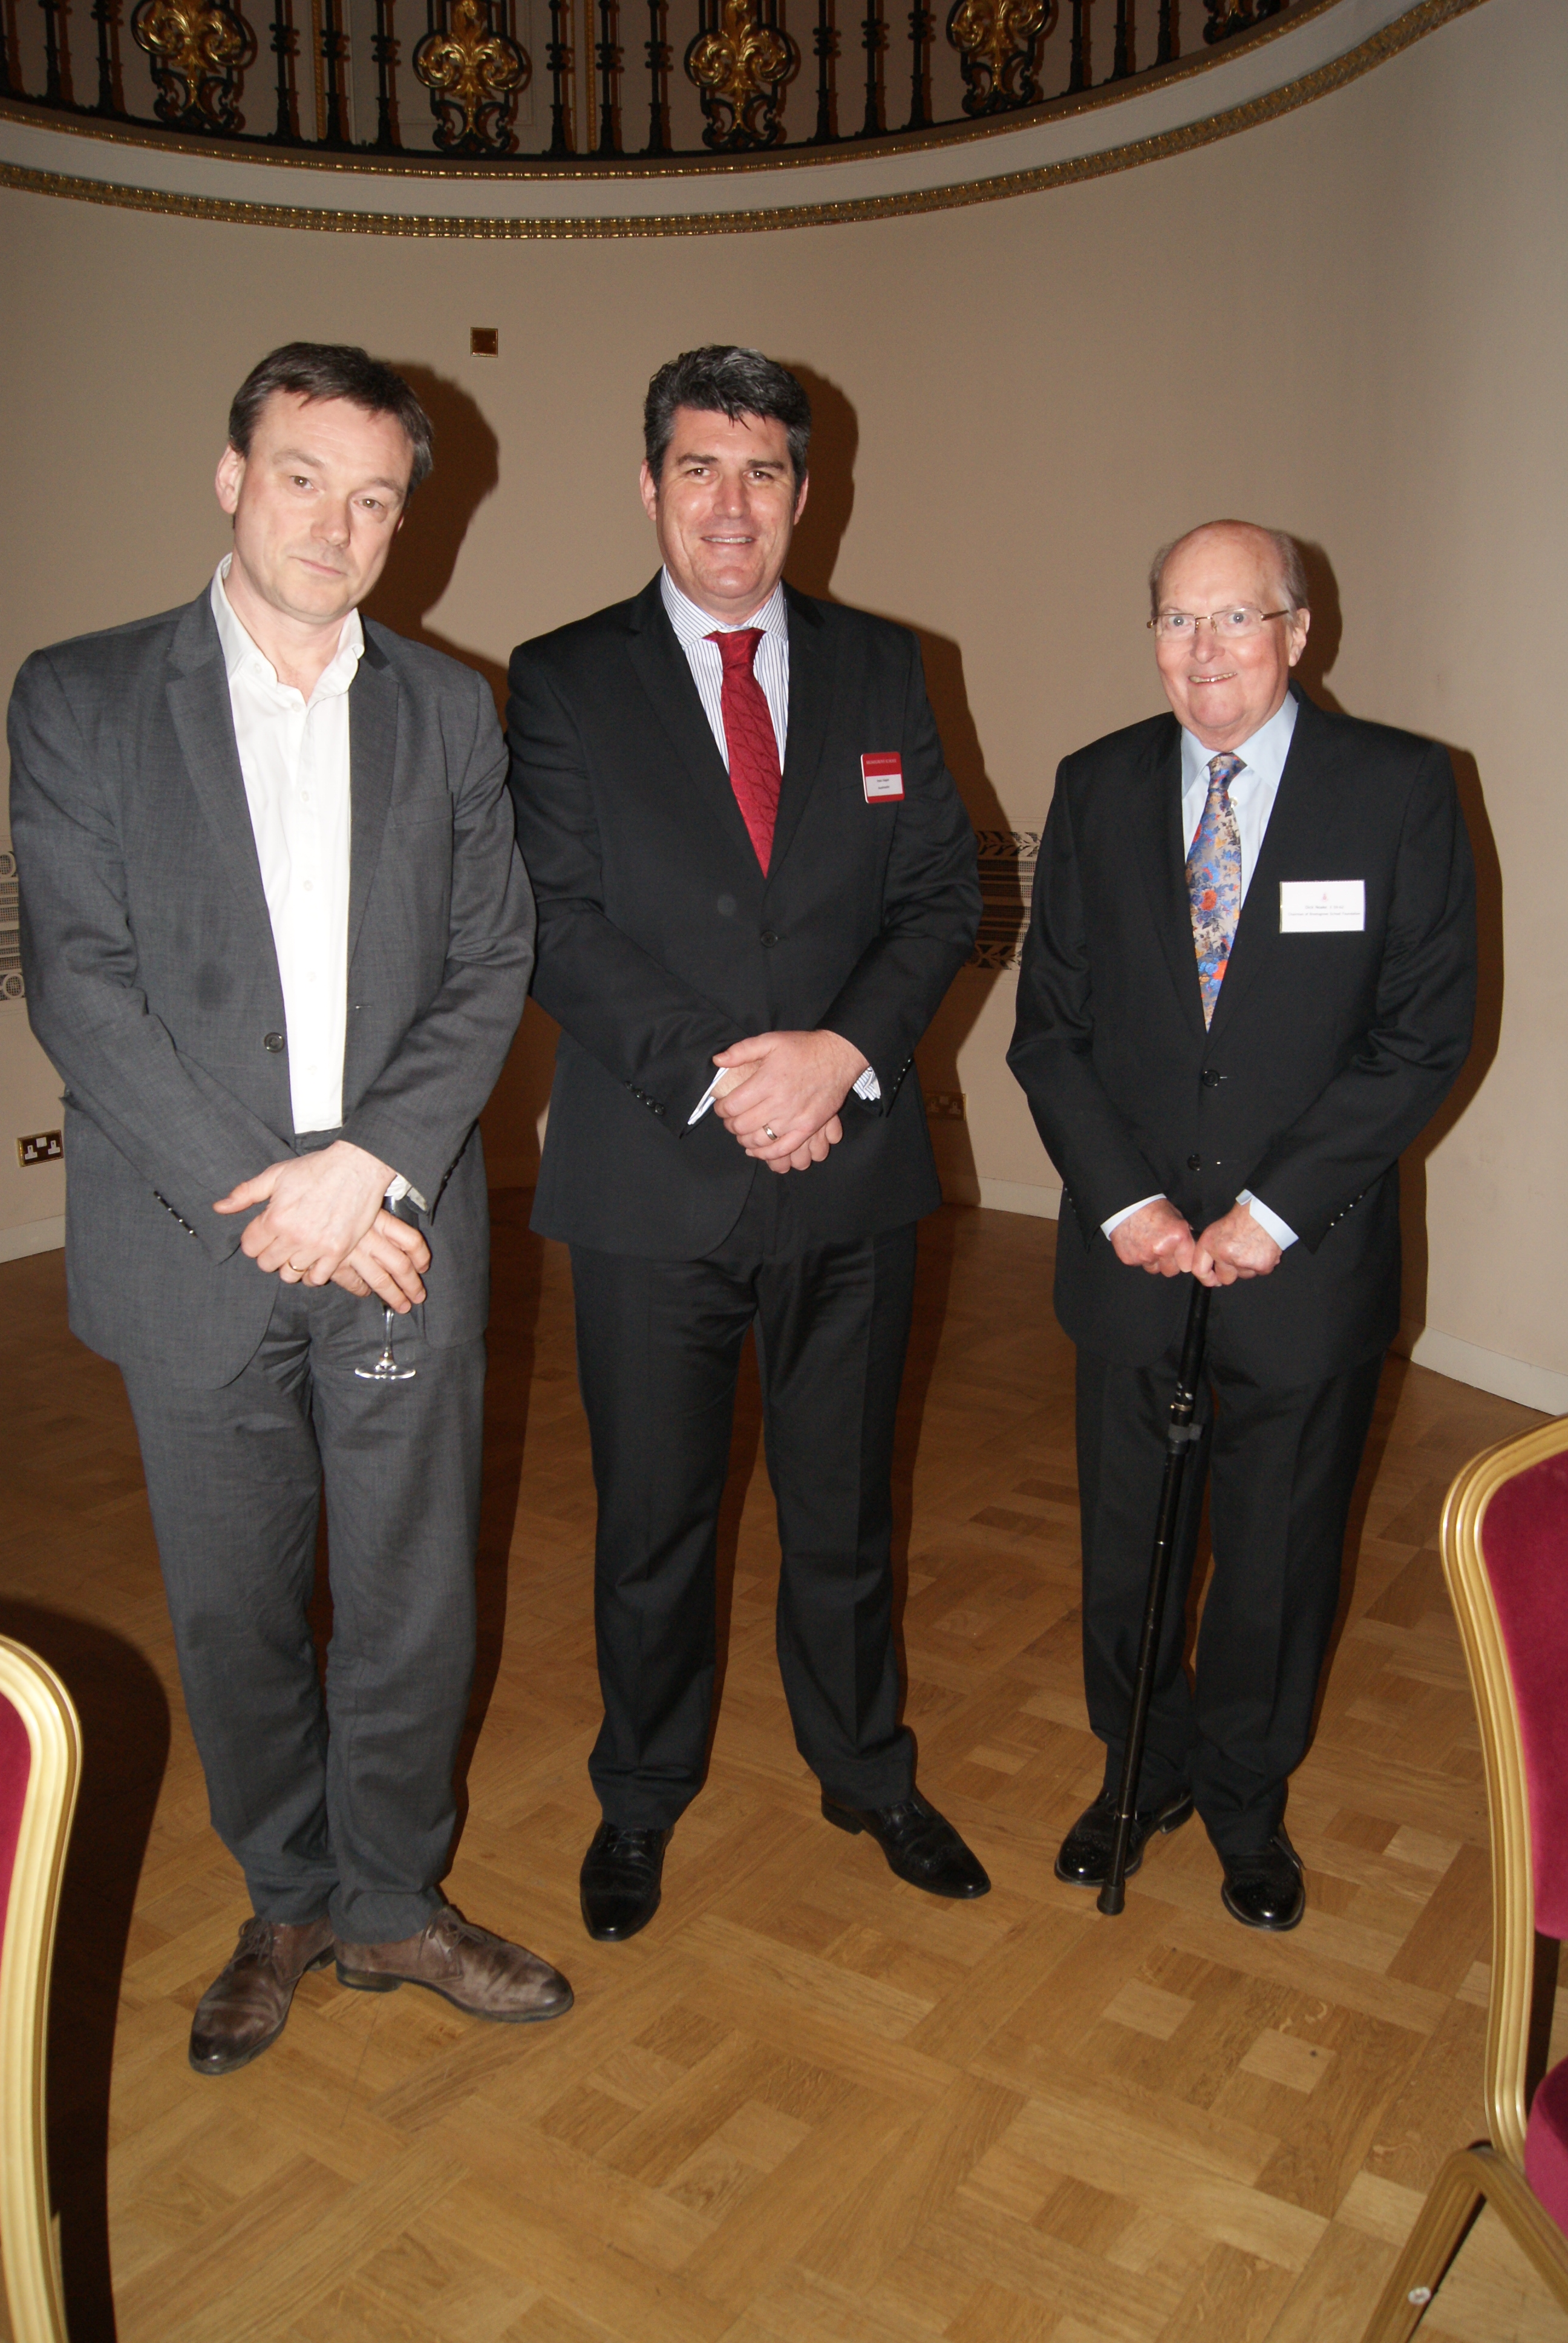 Stephen Page (Guest Speaker), Peter Clague (Headmaster) and Dick Noake (Chairman of Governors)